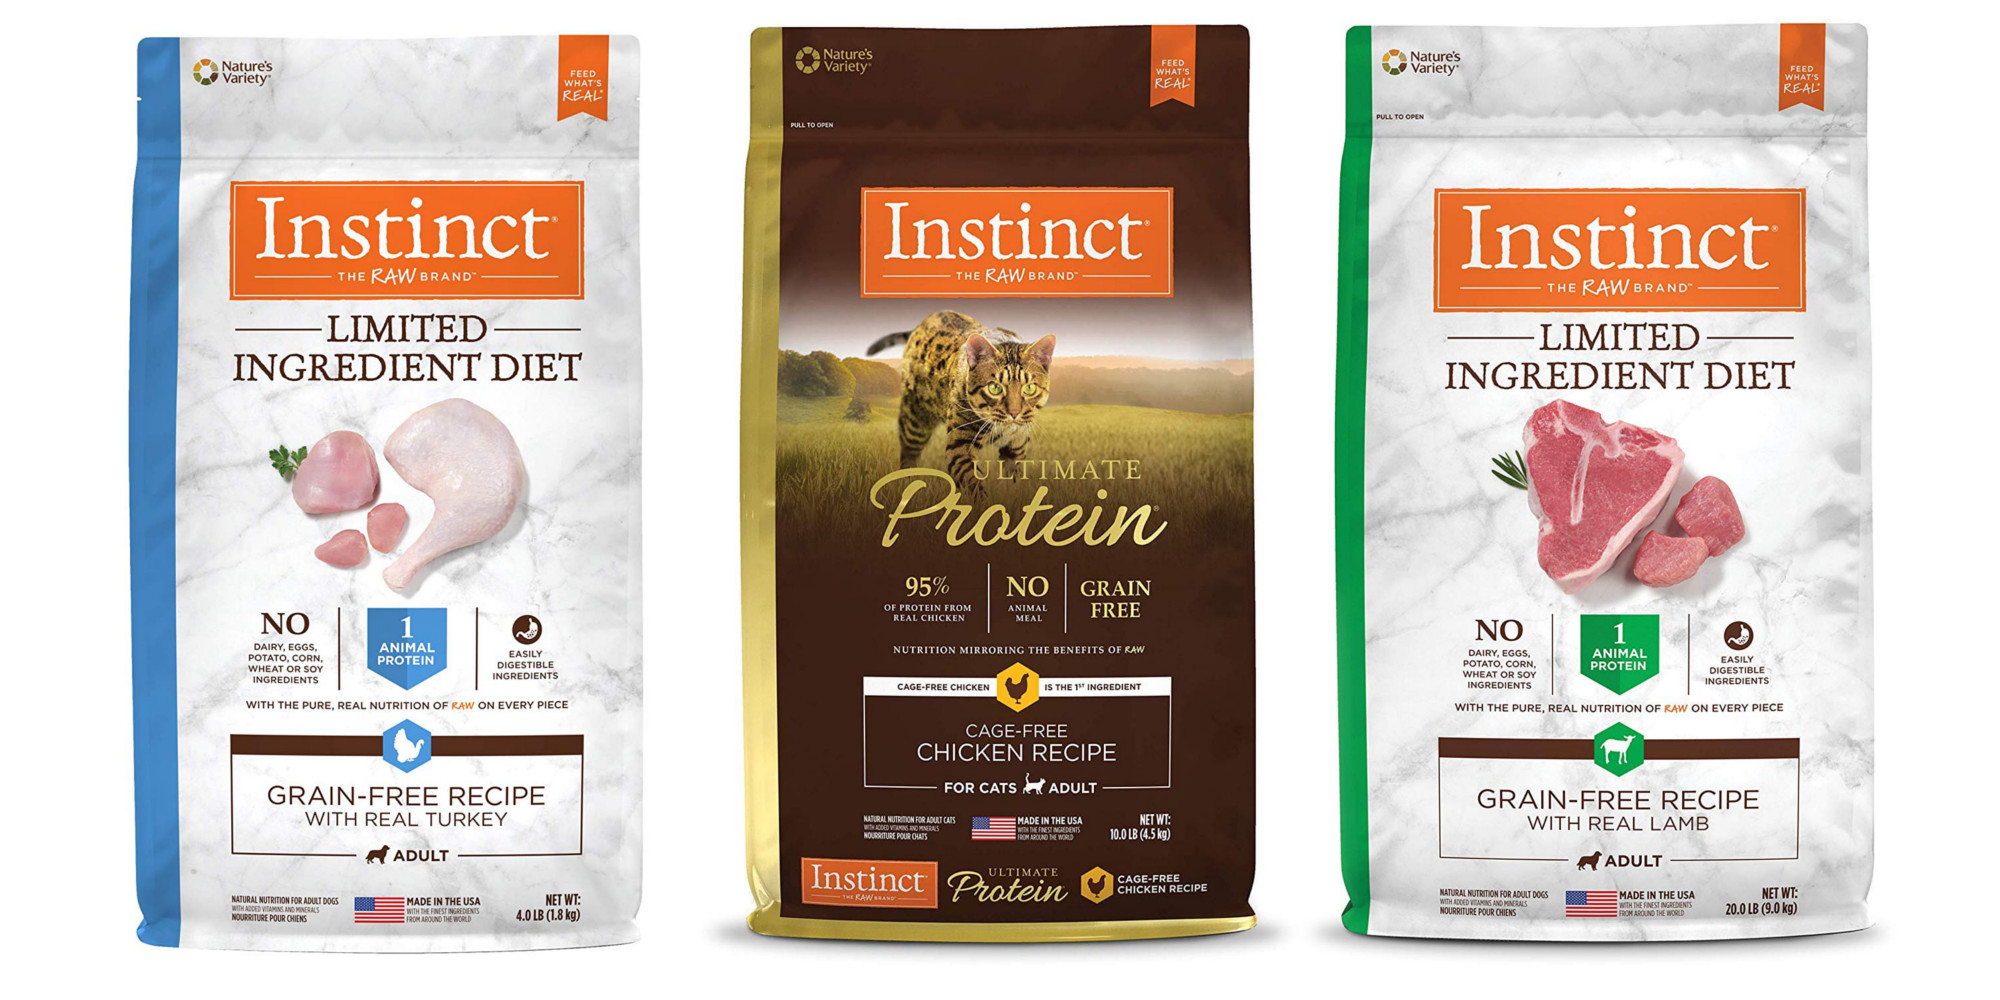 Load up on Instinct dog/cat food in today's Gold Box at 25 ...